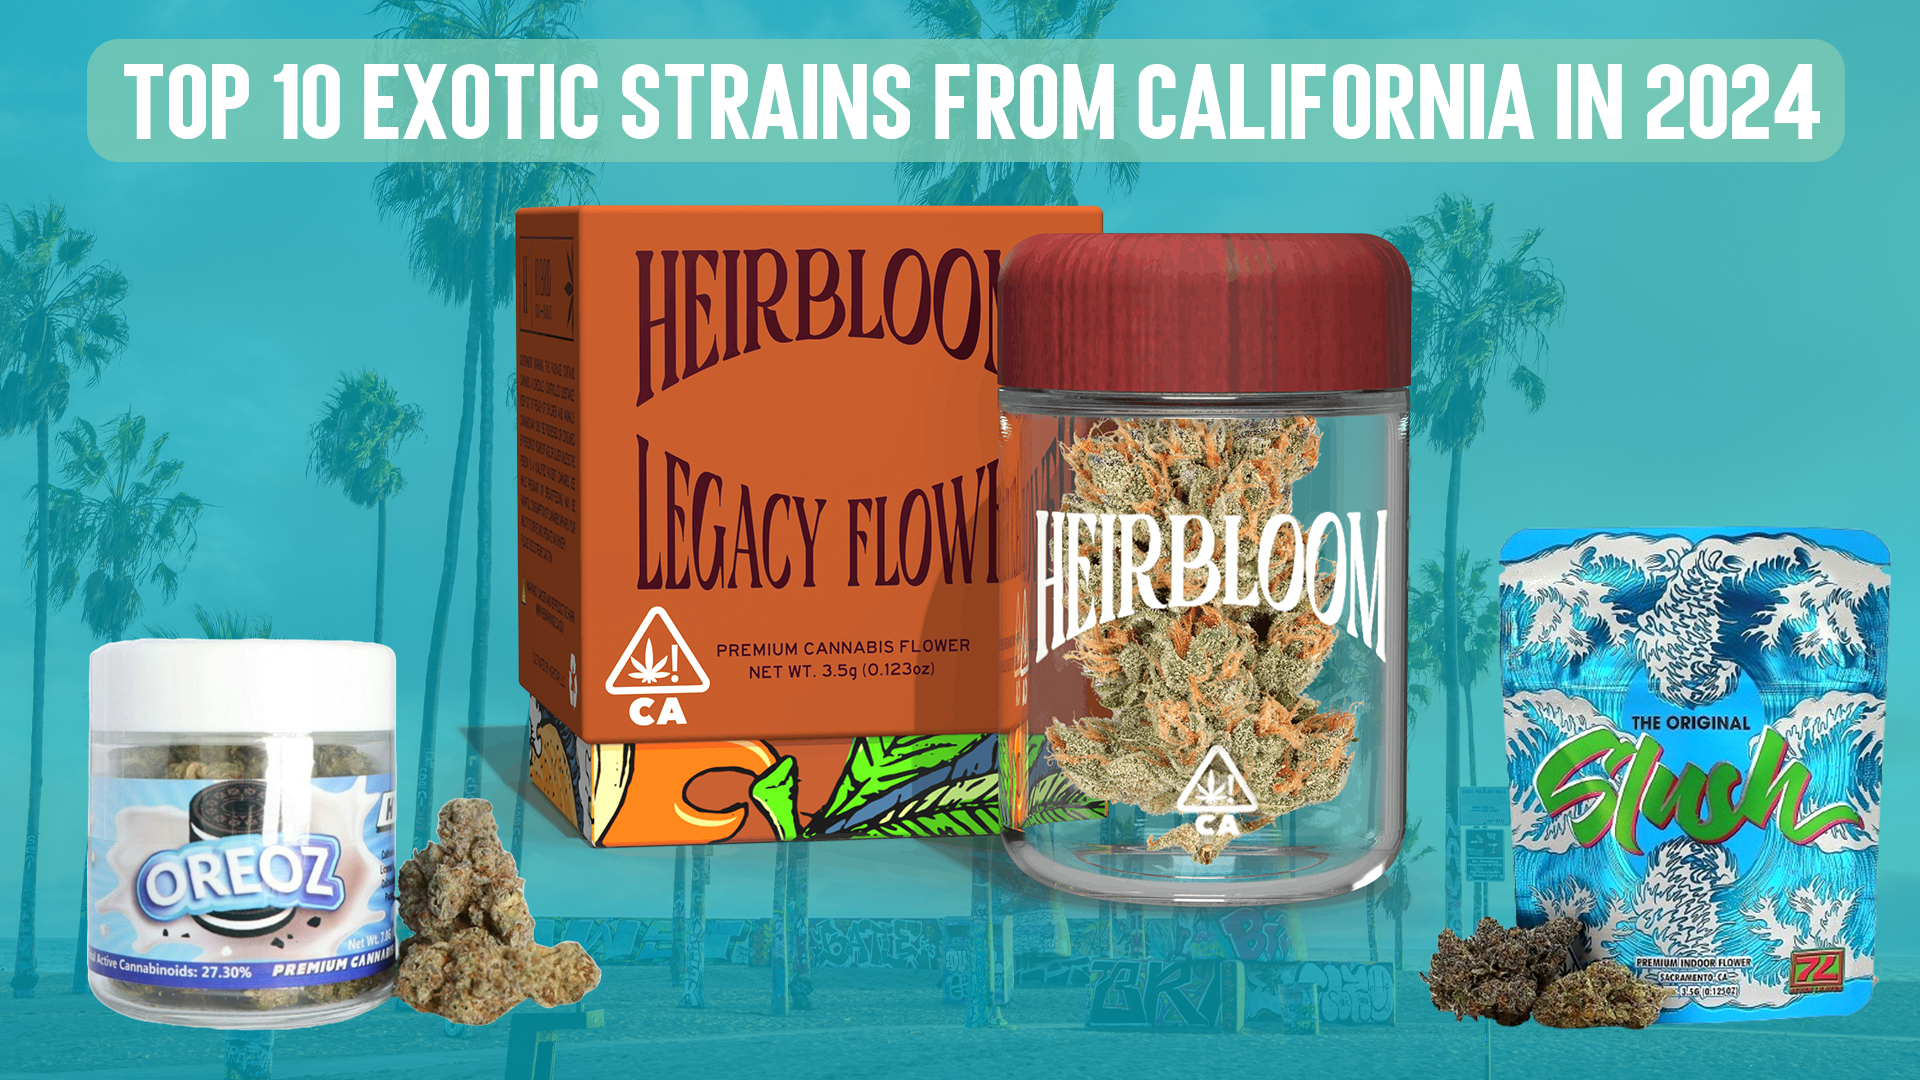 Top 10 Exotic Cannabis Strains From California in 2024